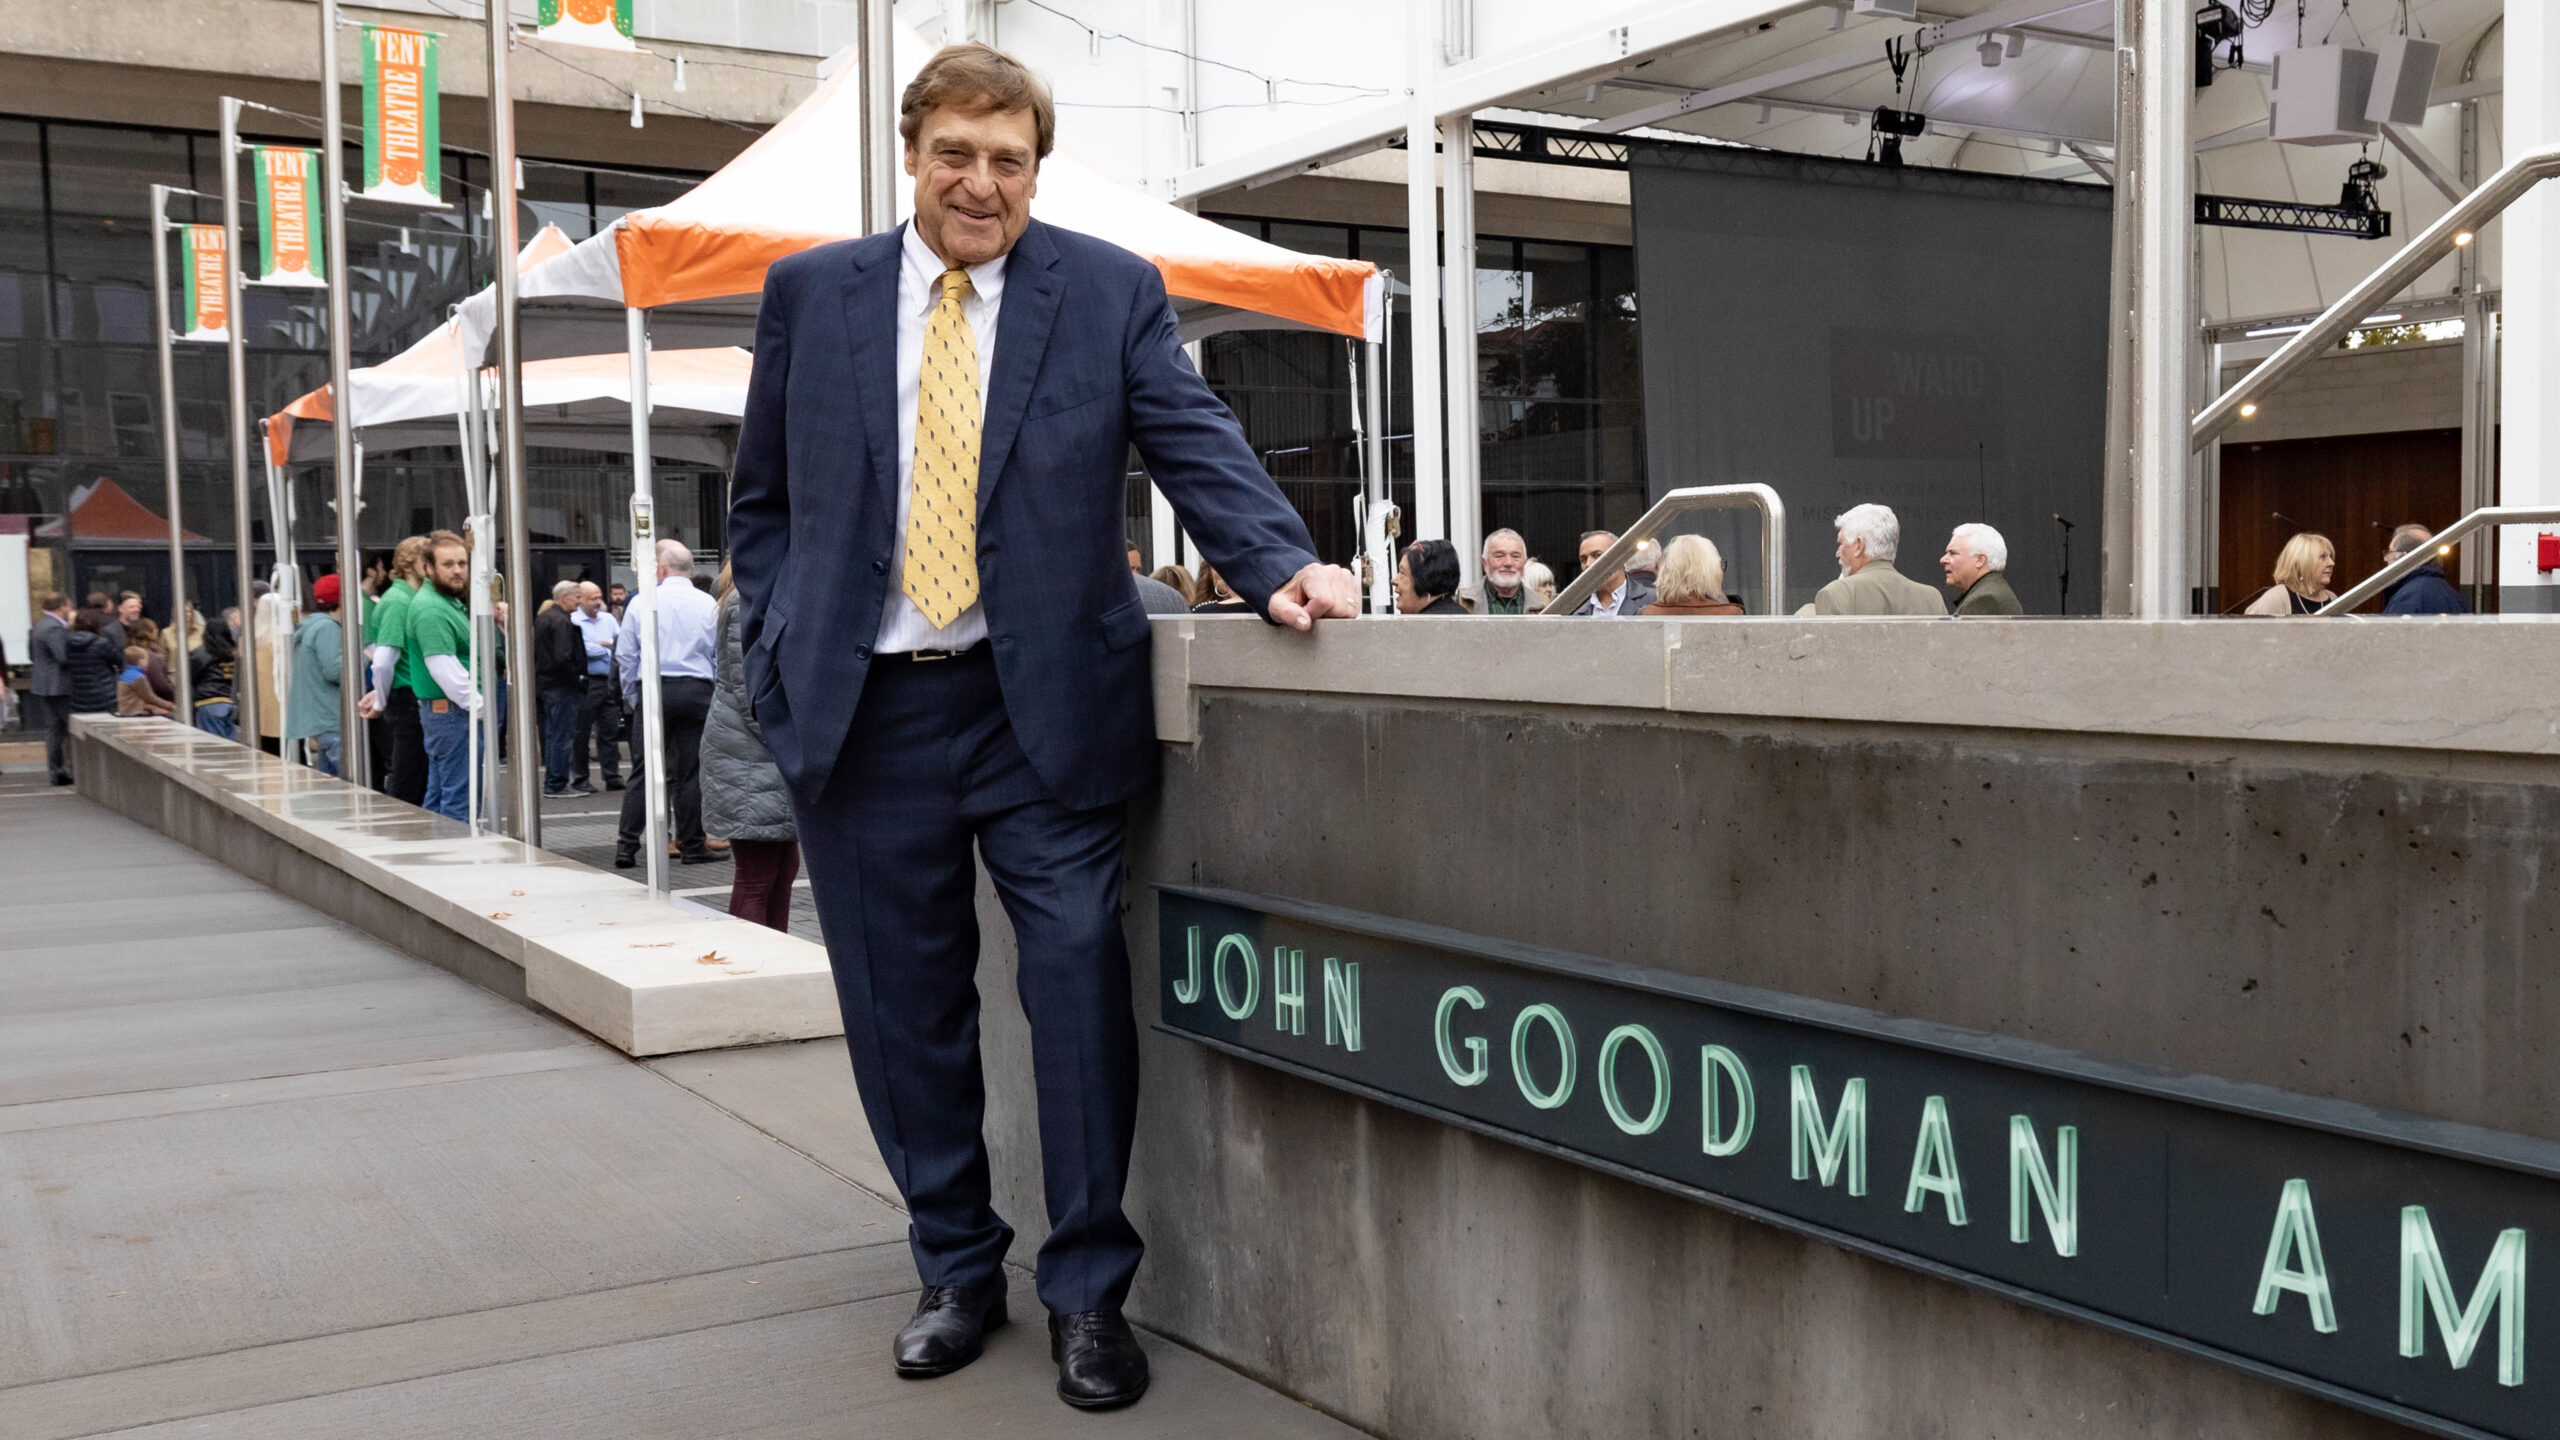 John Goodman stands in front of a sign for his Amphitheatre on the Missouri State campus.